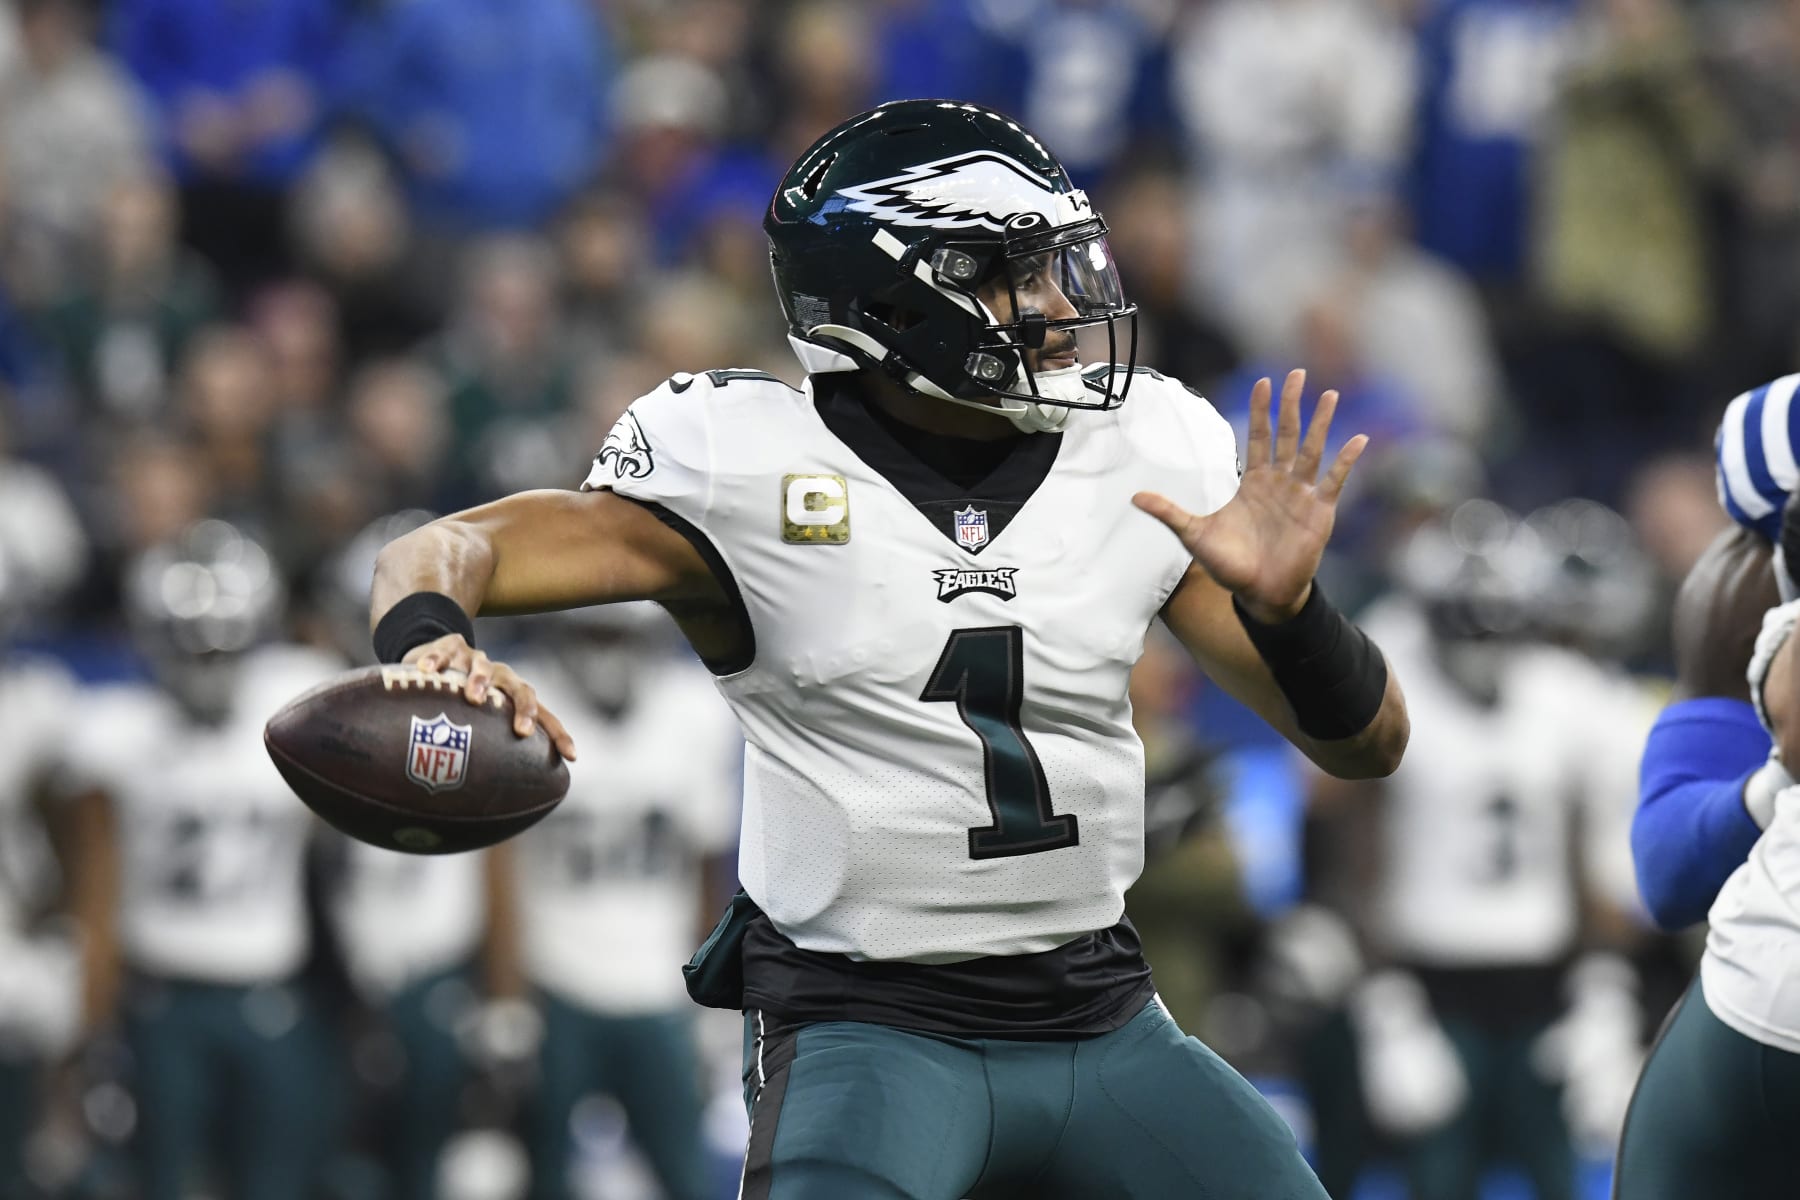 NFC playoff picture: Eagles are firmly in the mix for No. 1 seed